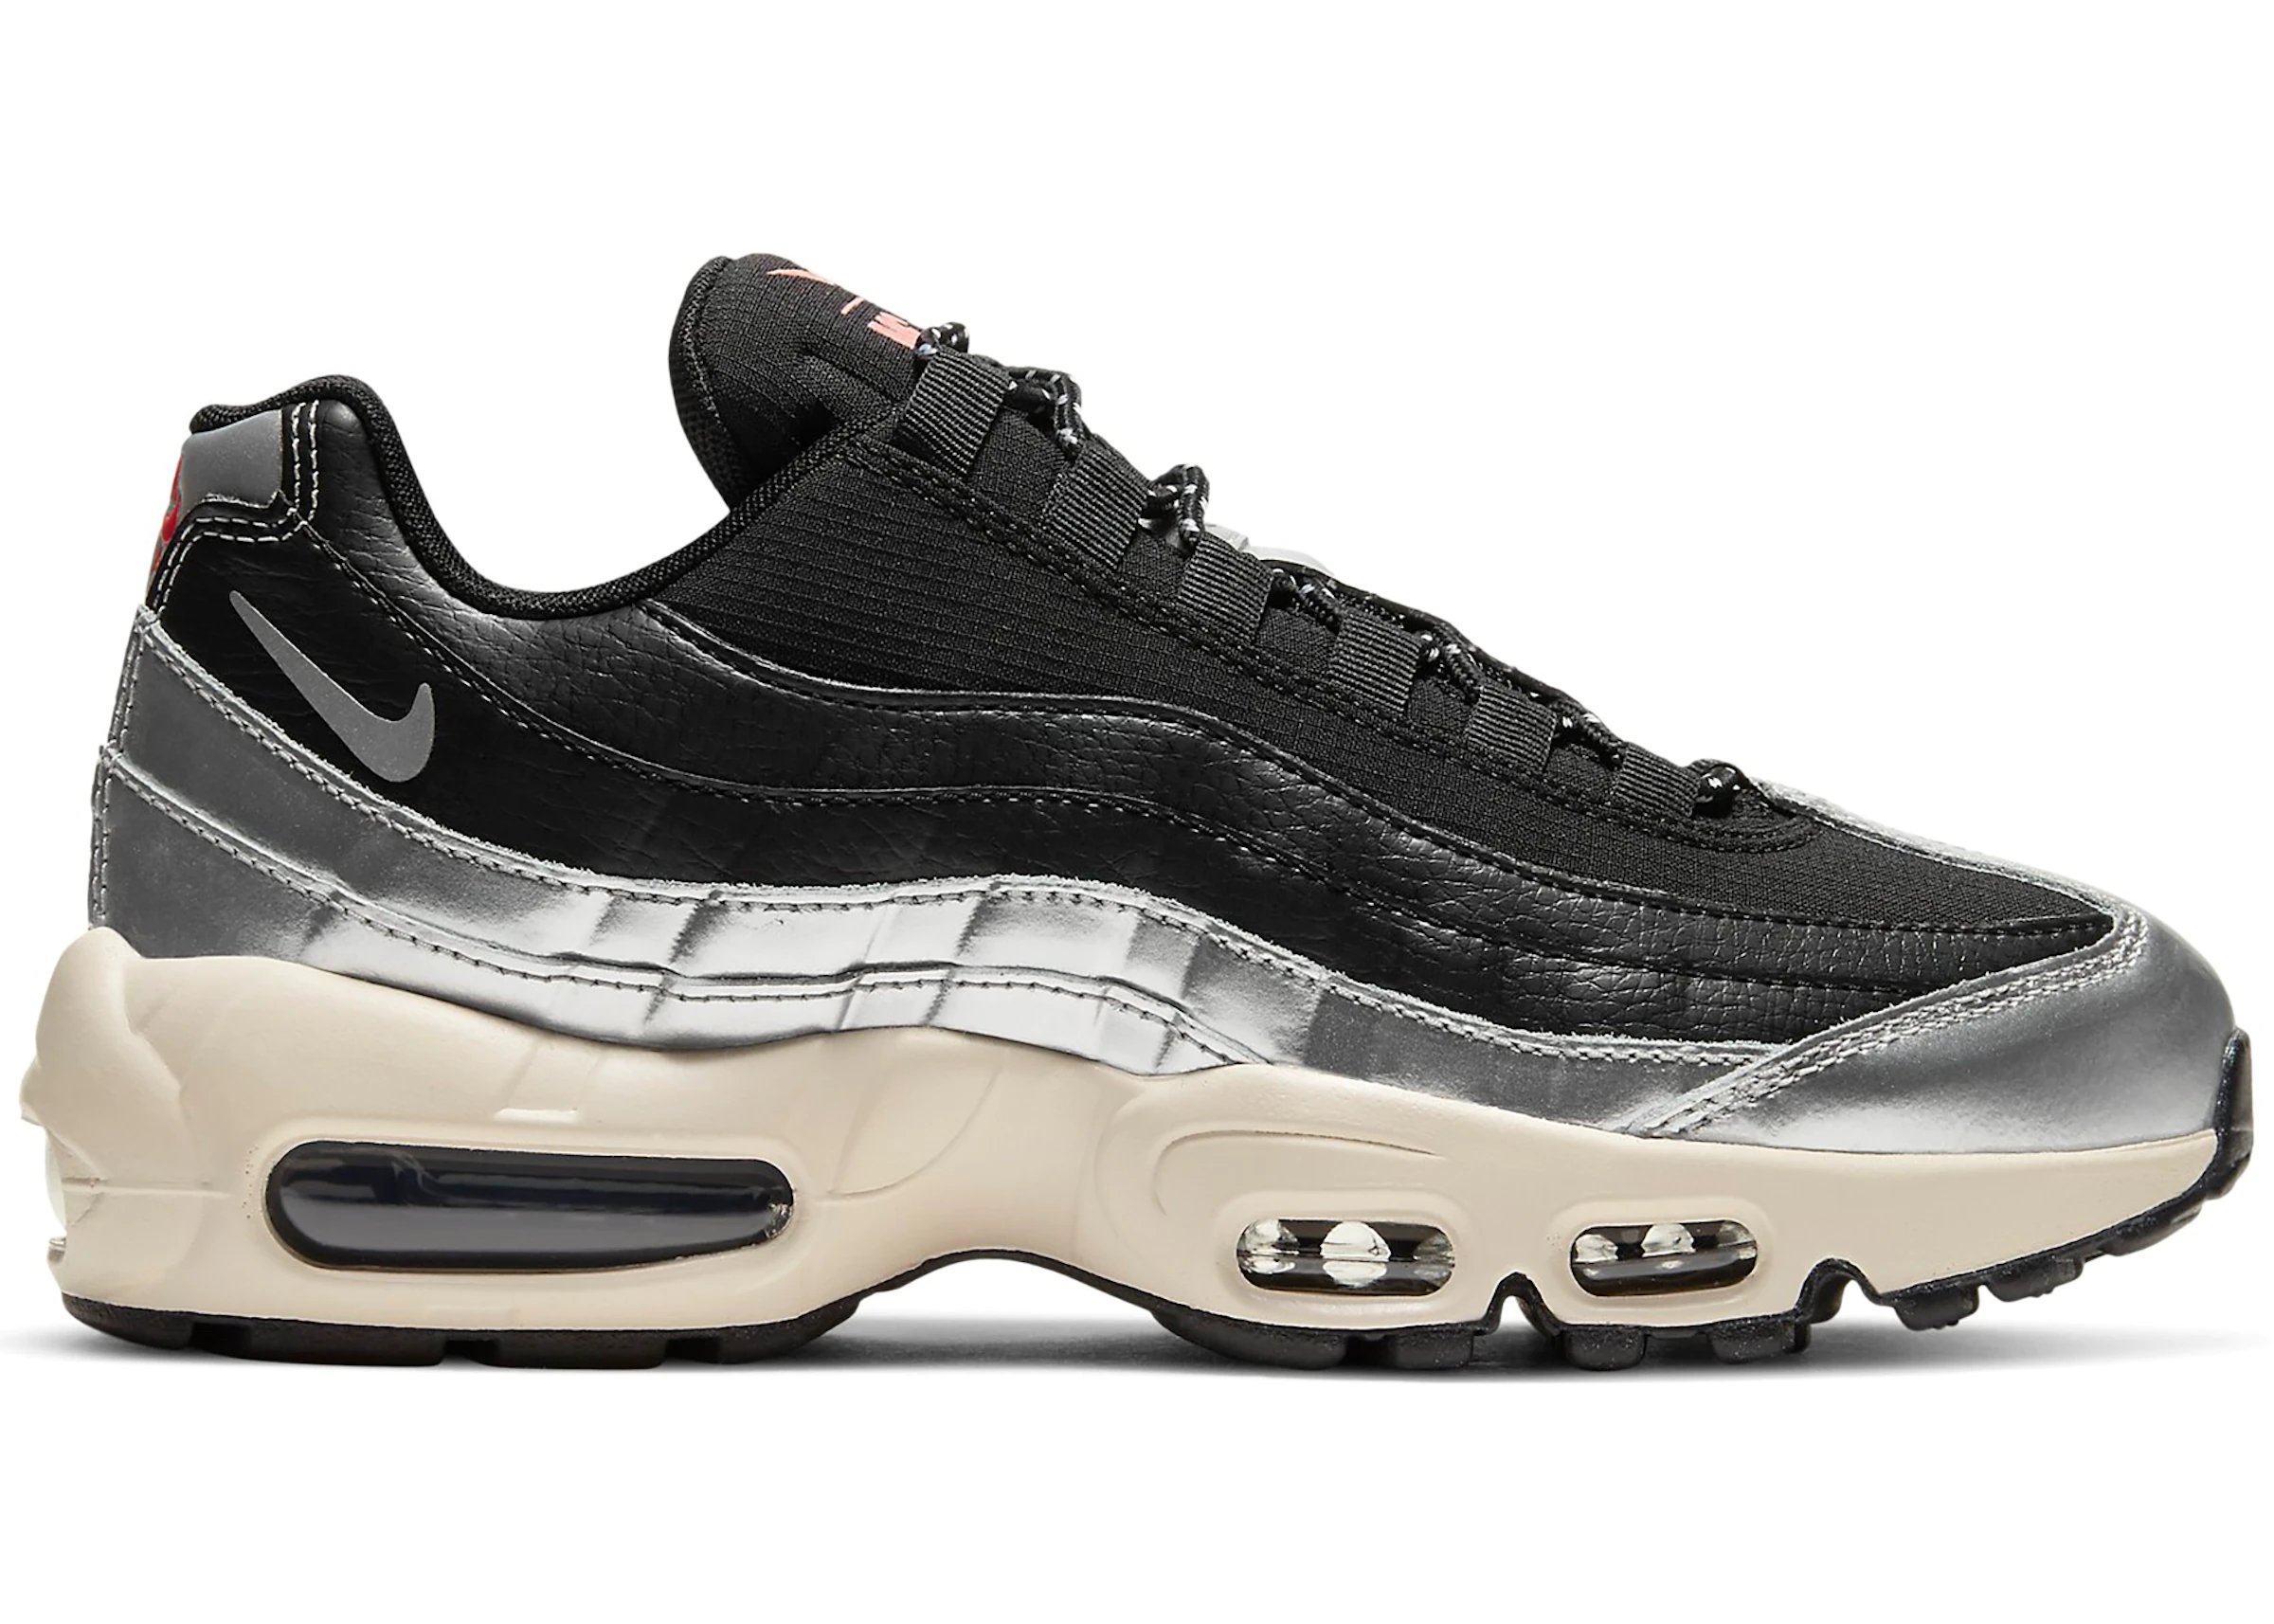 Nike Air Max 95 SE 3M Pack Silver (Women's) - CT1935-001 - US